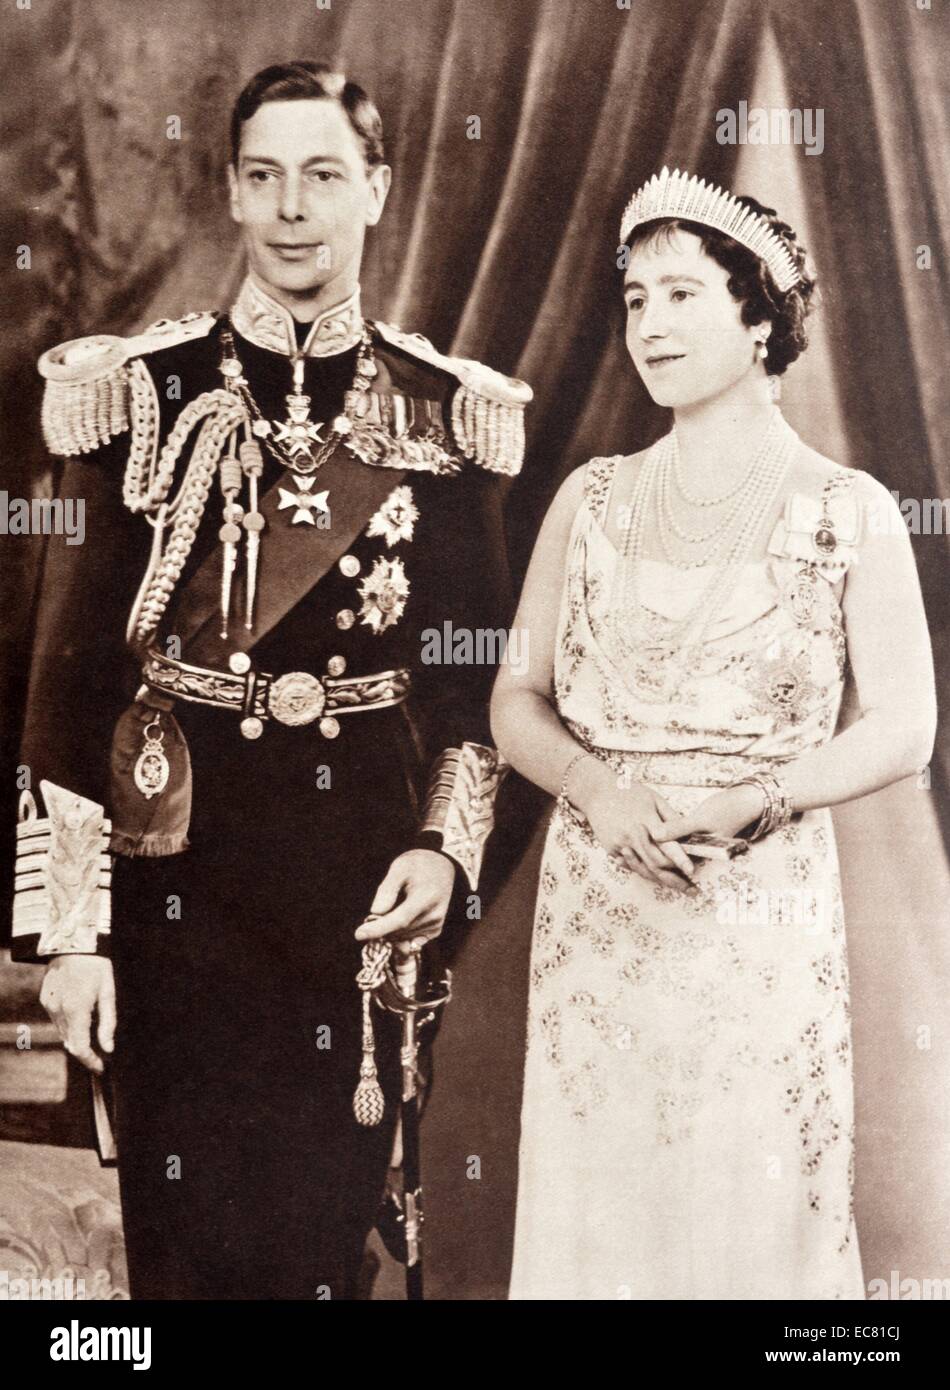 Portrait of King George VI and Queen Elizabeth of England, in formal coronation robes. Stock Photo